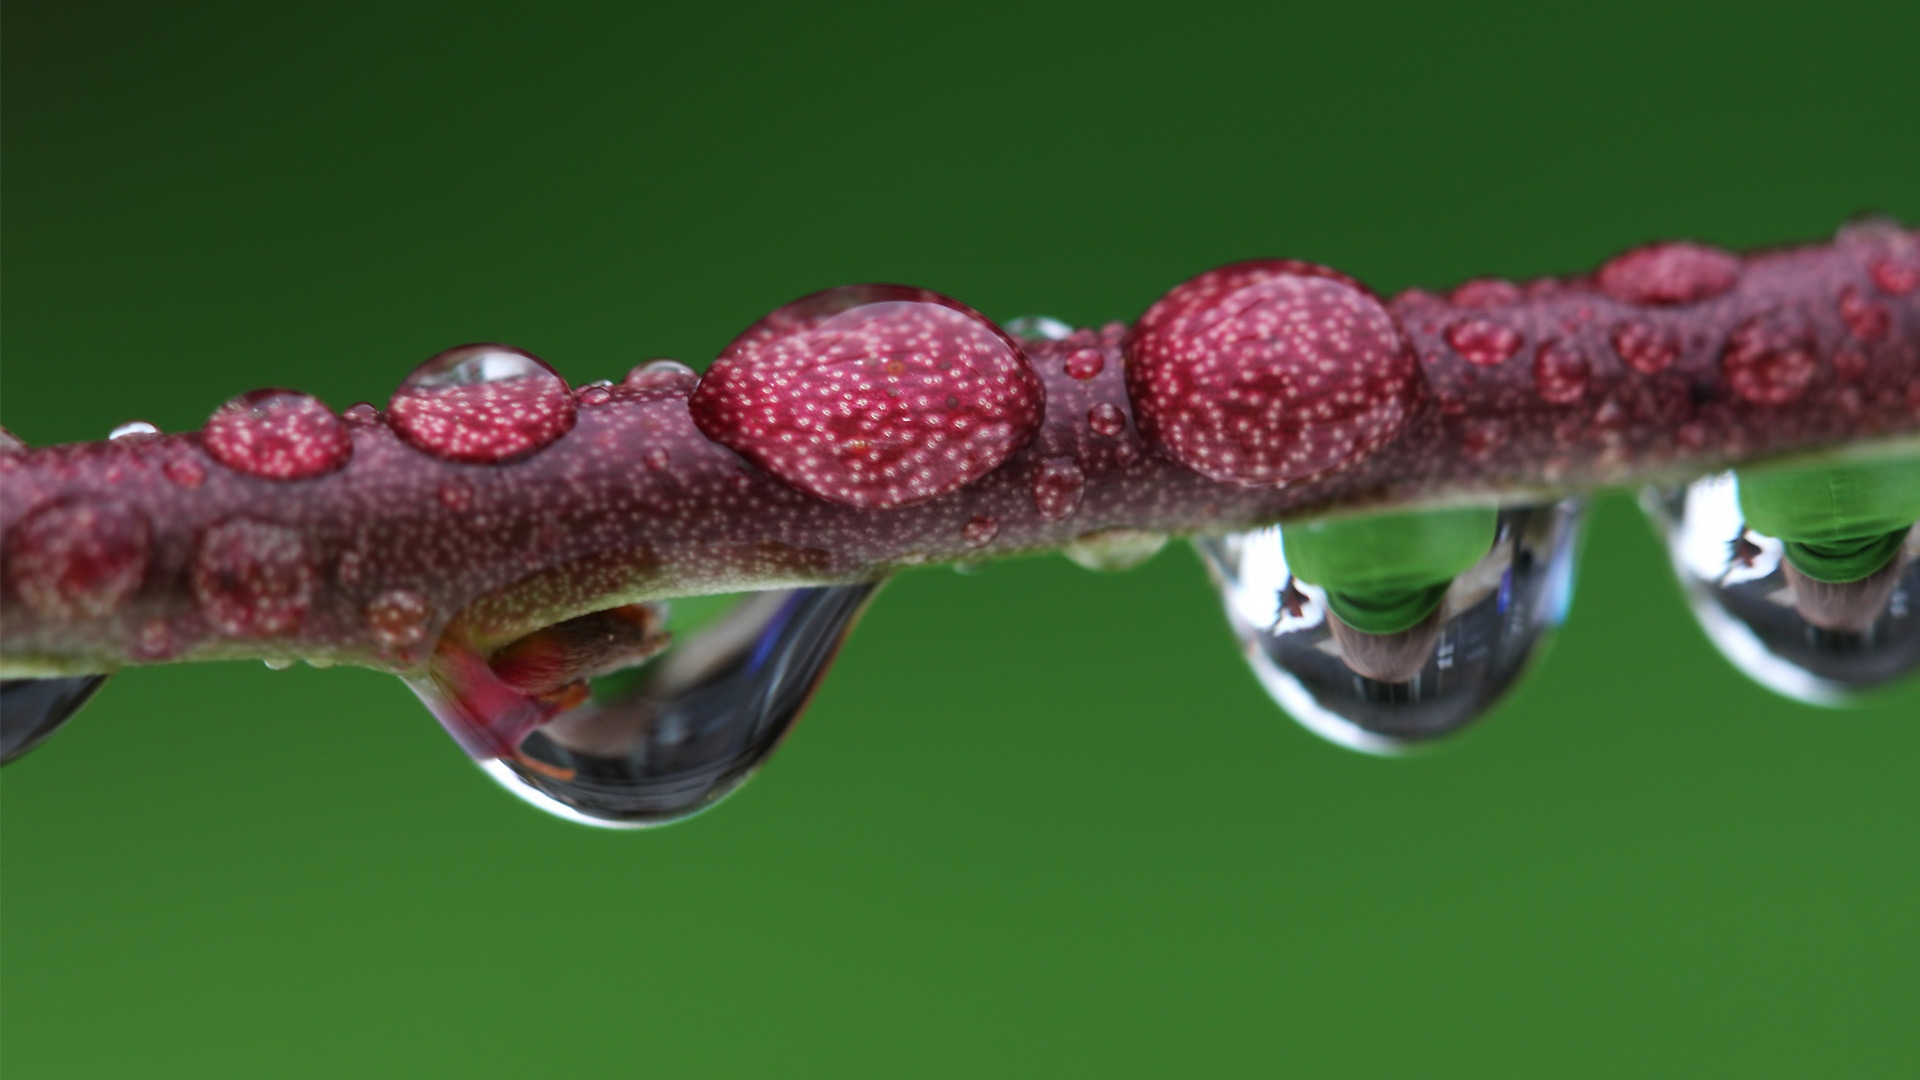 Droplet magnified branch for 1920 x 1080 HDTV 1080p resolution